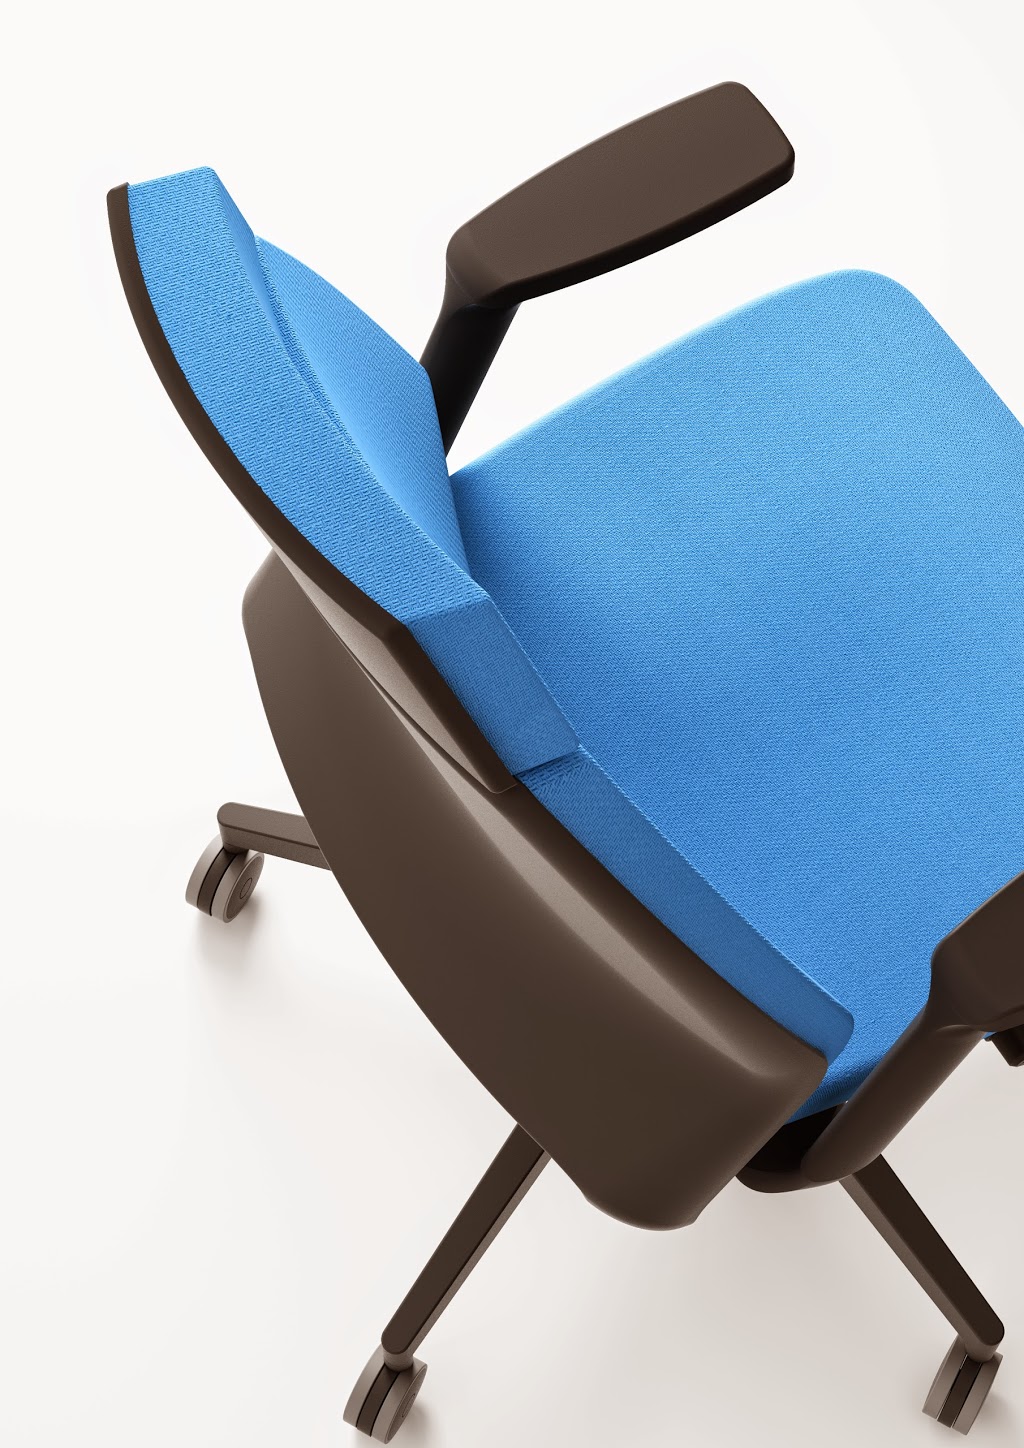 Chair Solutions Pty | furniture store | 57 Raubers Rd, Northgate QLD 4013, Australia | 0732676233 OR +61 7 3267 6233